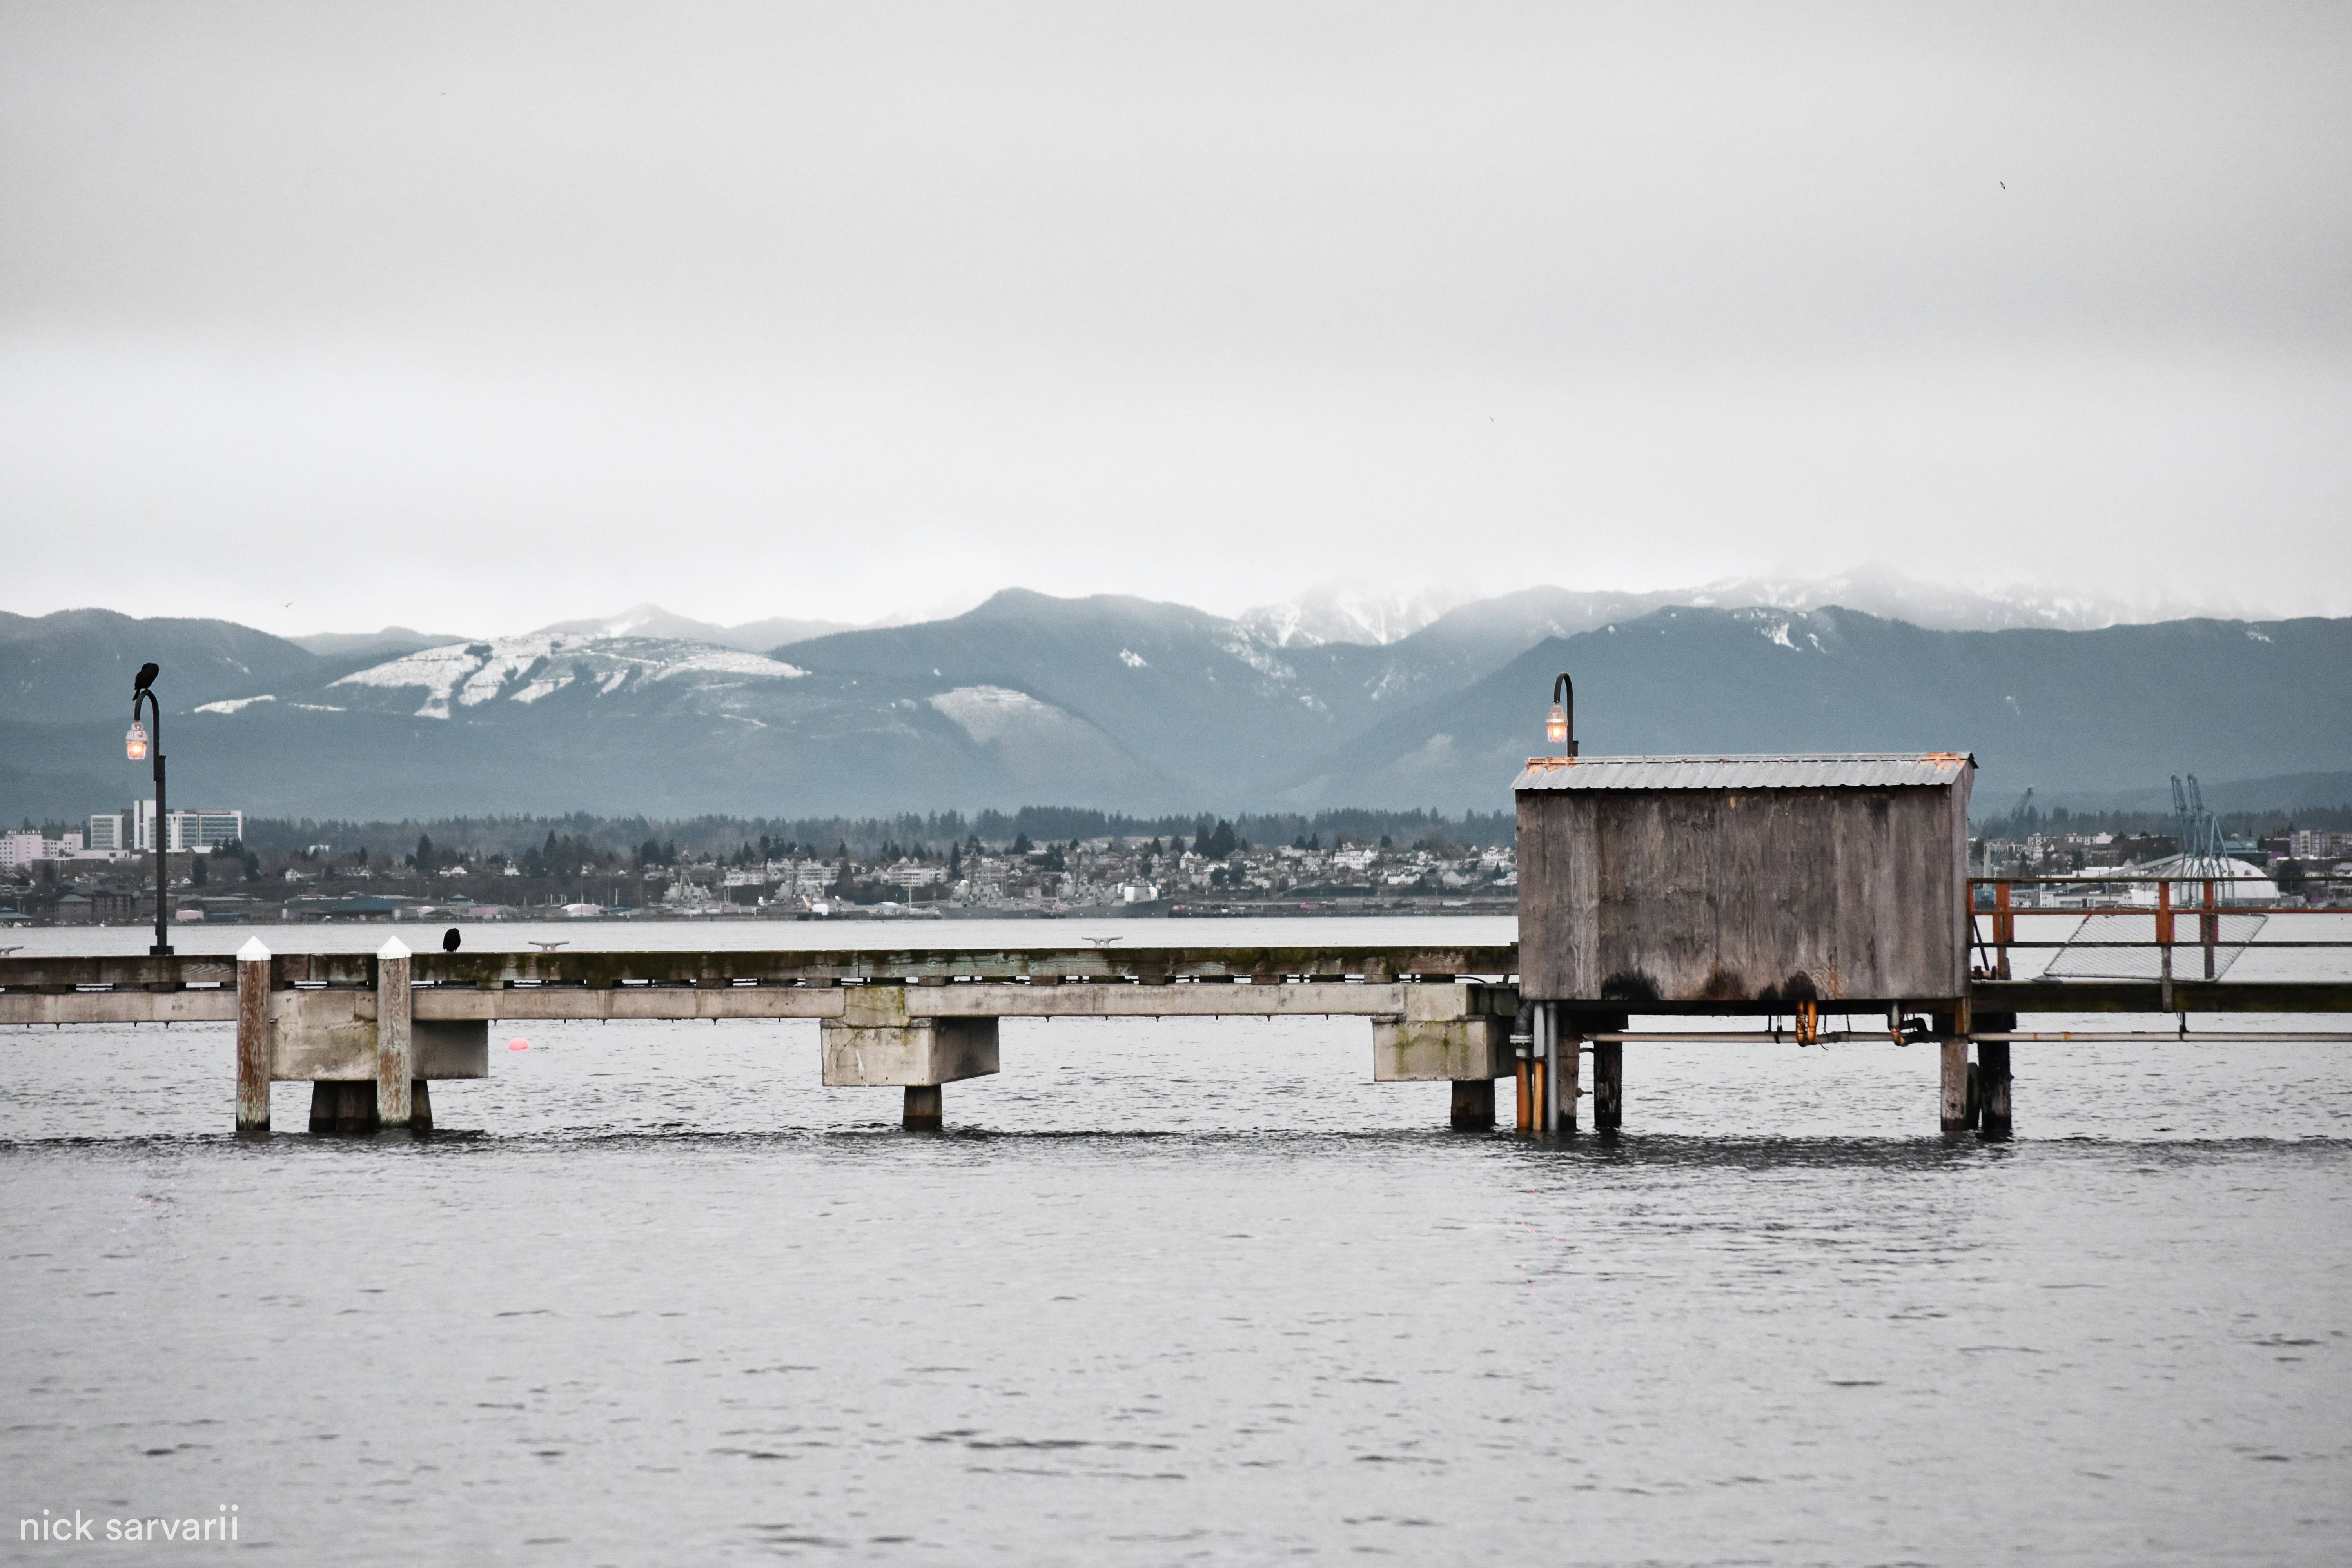 Pier in Mukilteo, Seattle With Snowy Mountains.